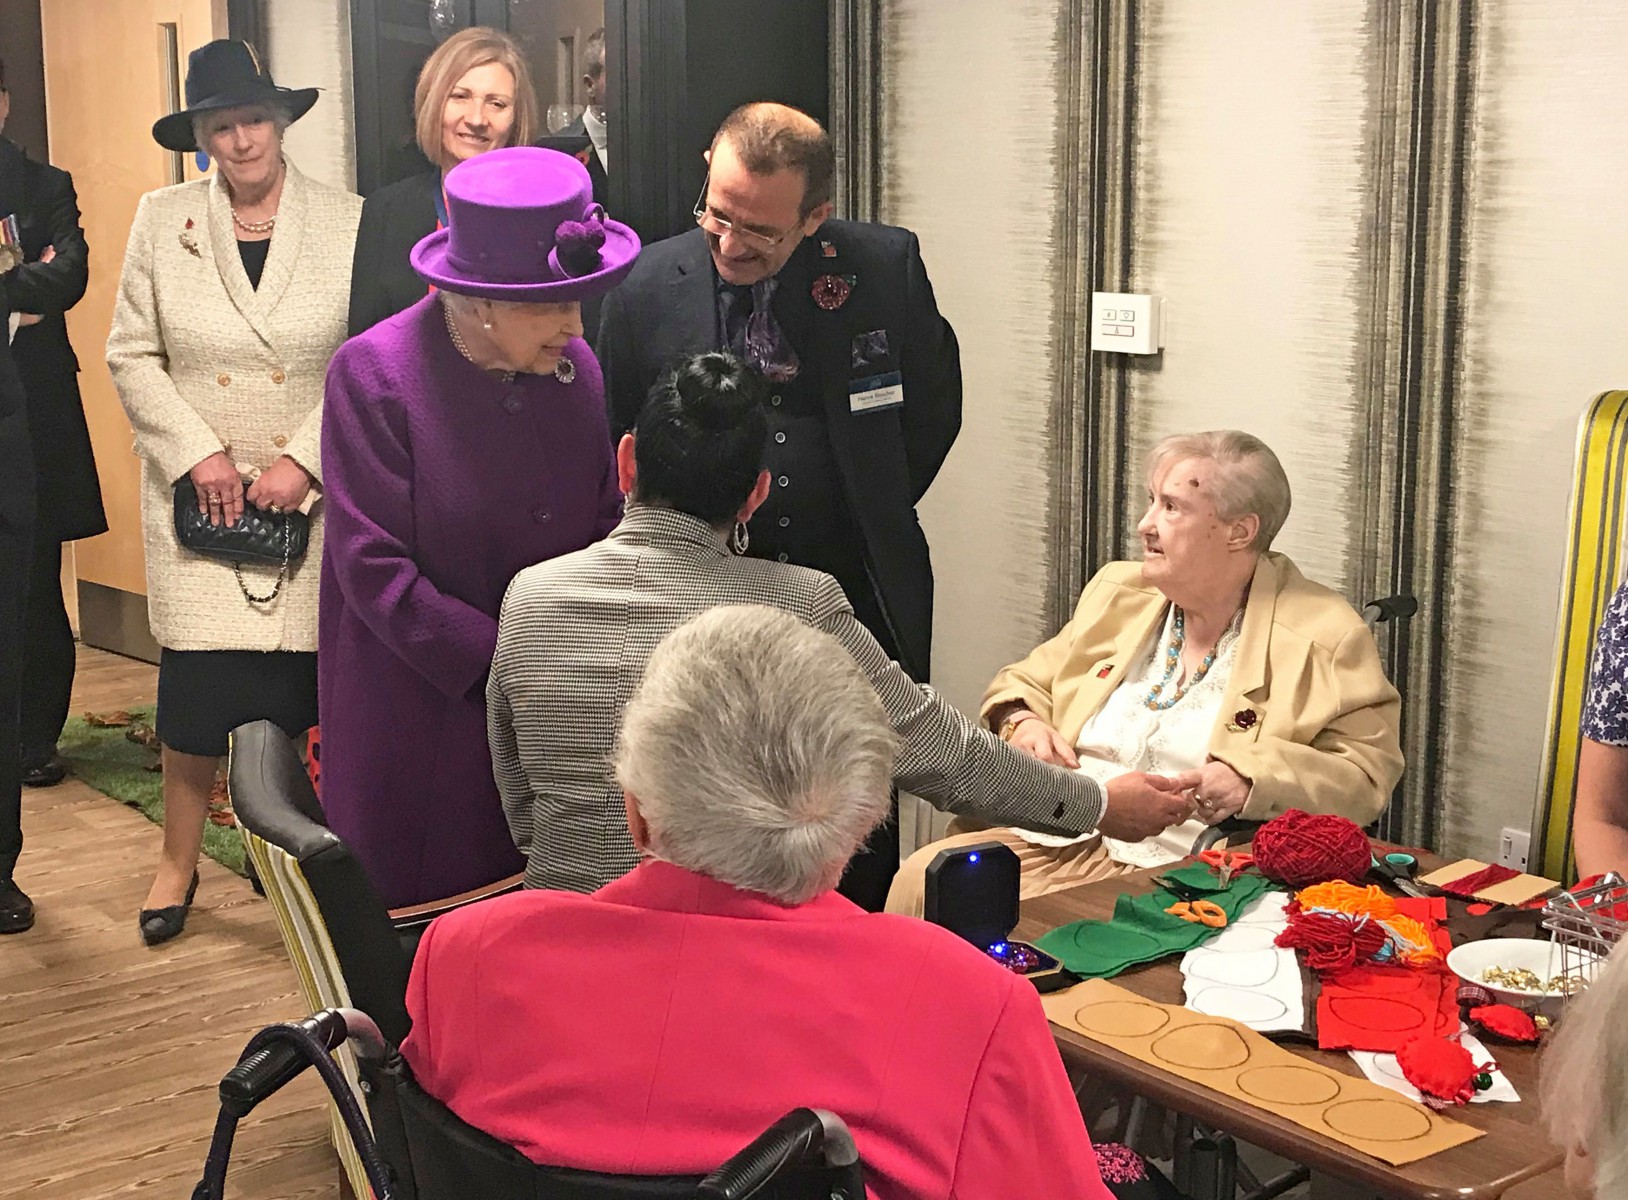 The monarch speaks with OAPs and learns about the recreational activities on offer at the village